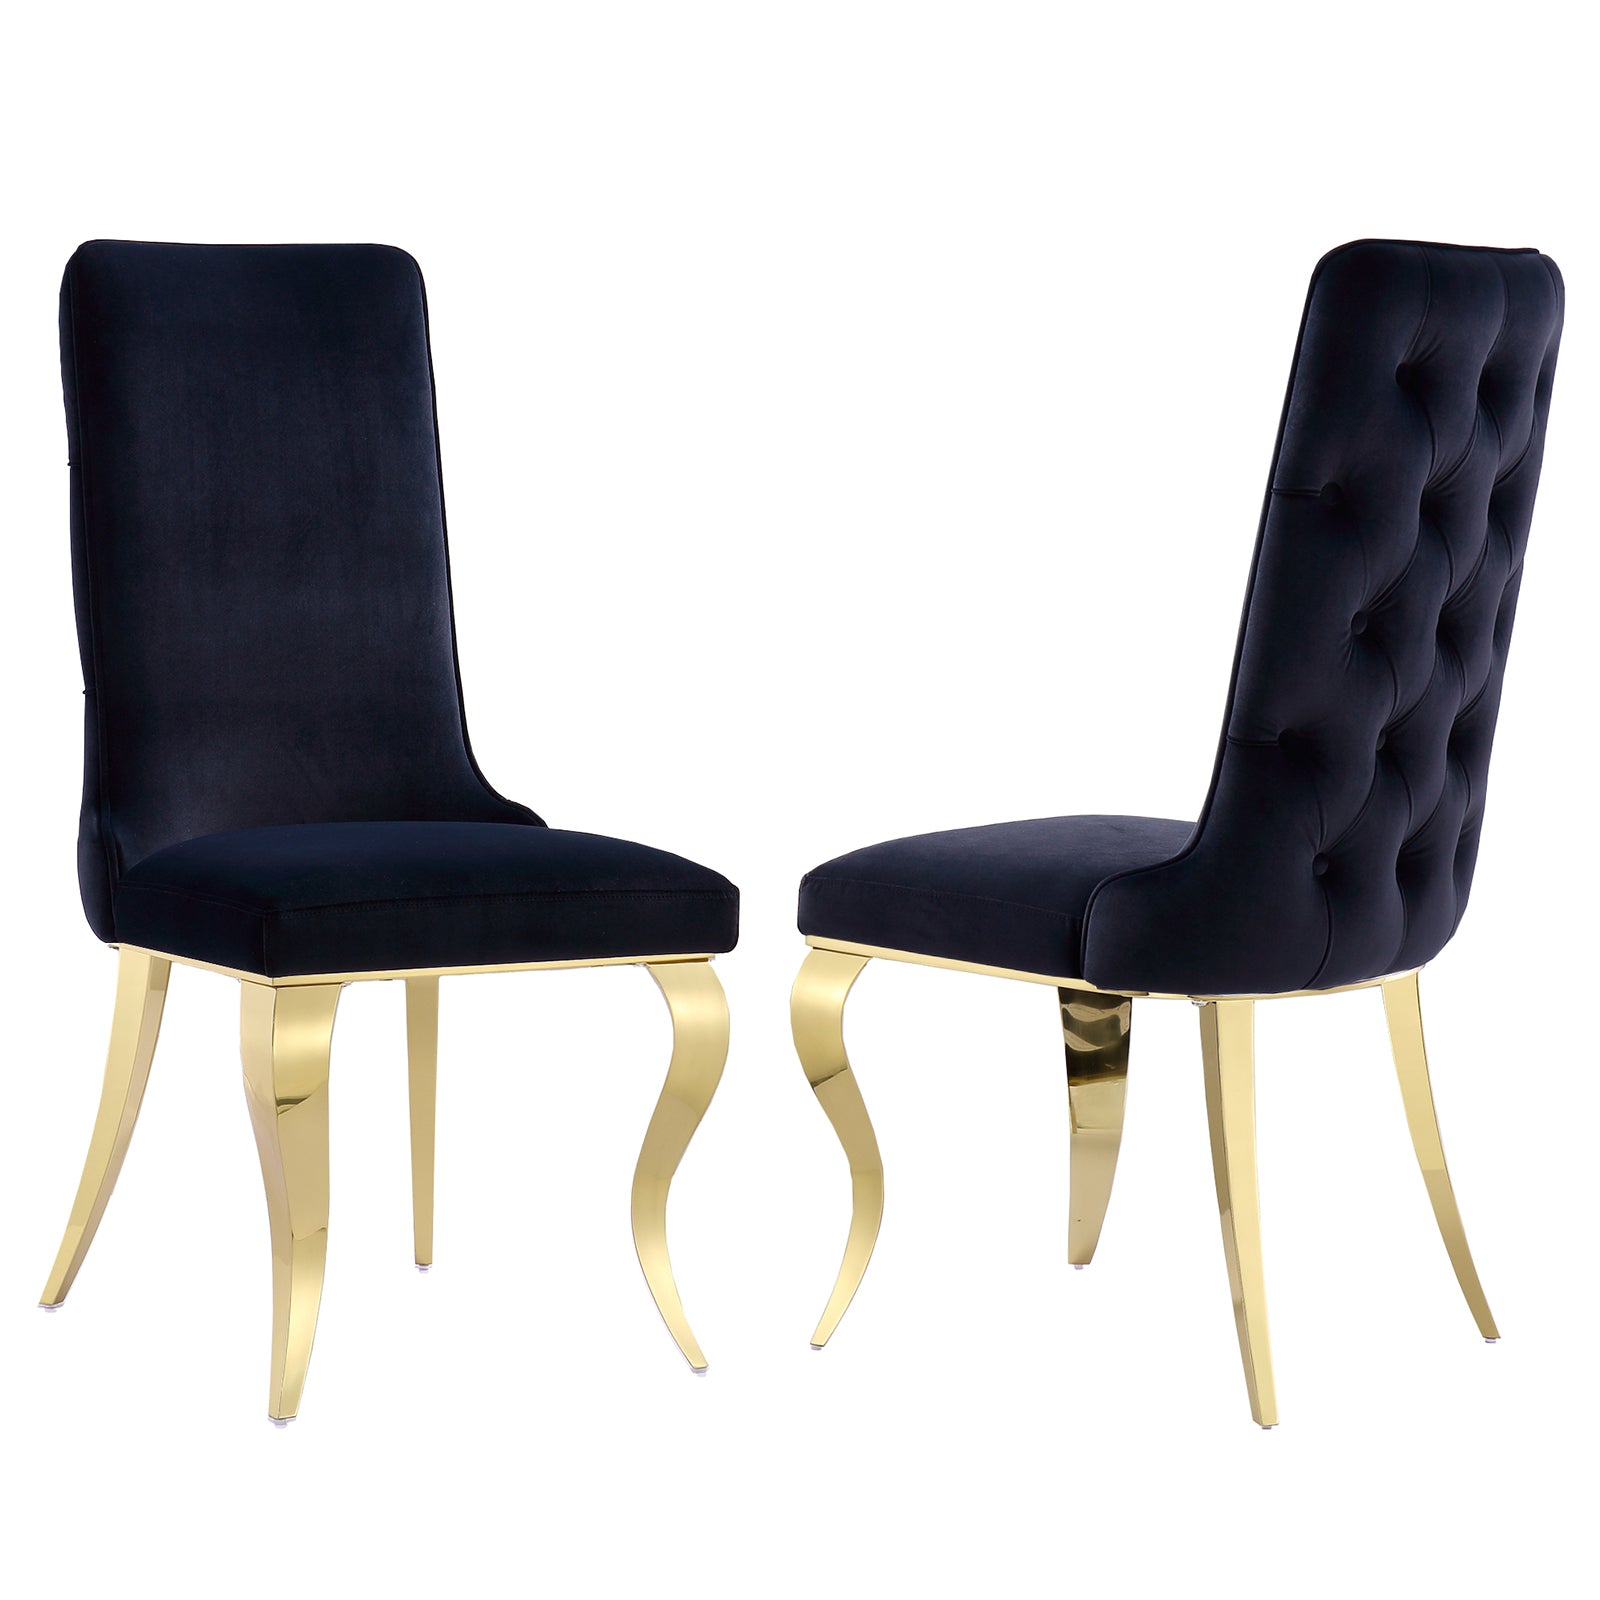 **"Decadent Dining: Unveiling the Luxury of Black Velvet and Gold Metal Dining Chairs"**